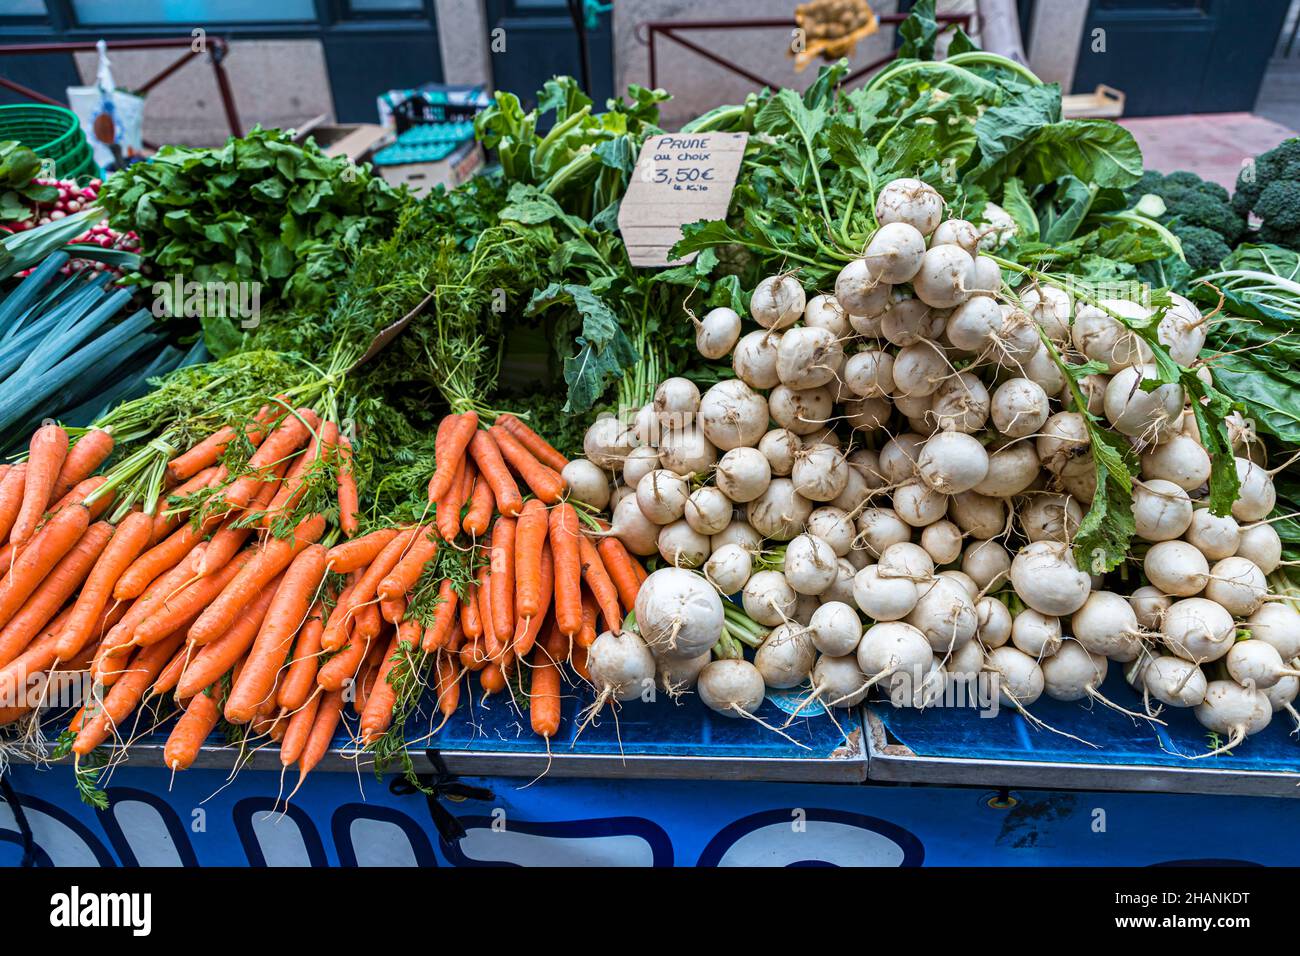 Weekly market in Draguignan, France Stock Photo